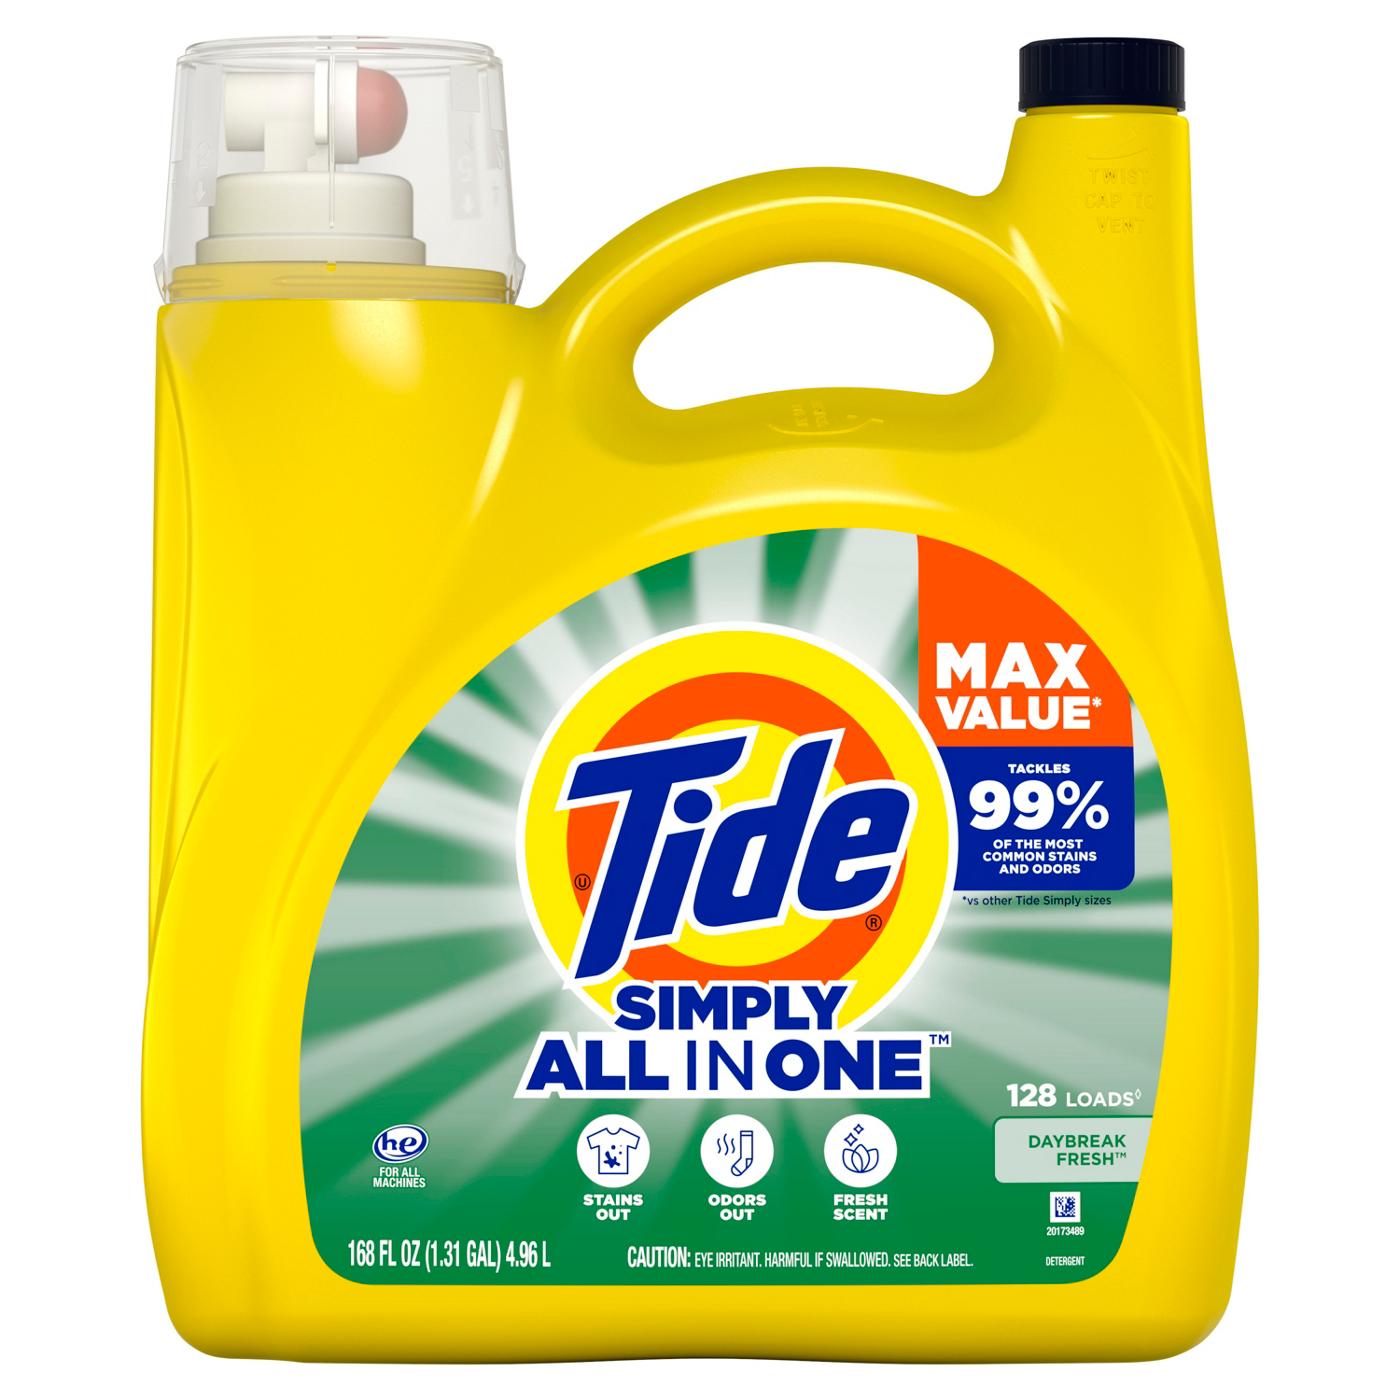 Tide Simply All In One Daybreak Fresh Liquid Laundry Detergent 128 Loads; image 1 of 7